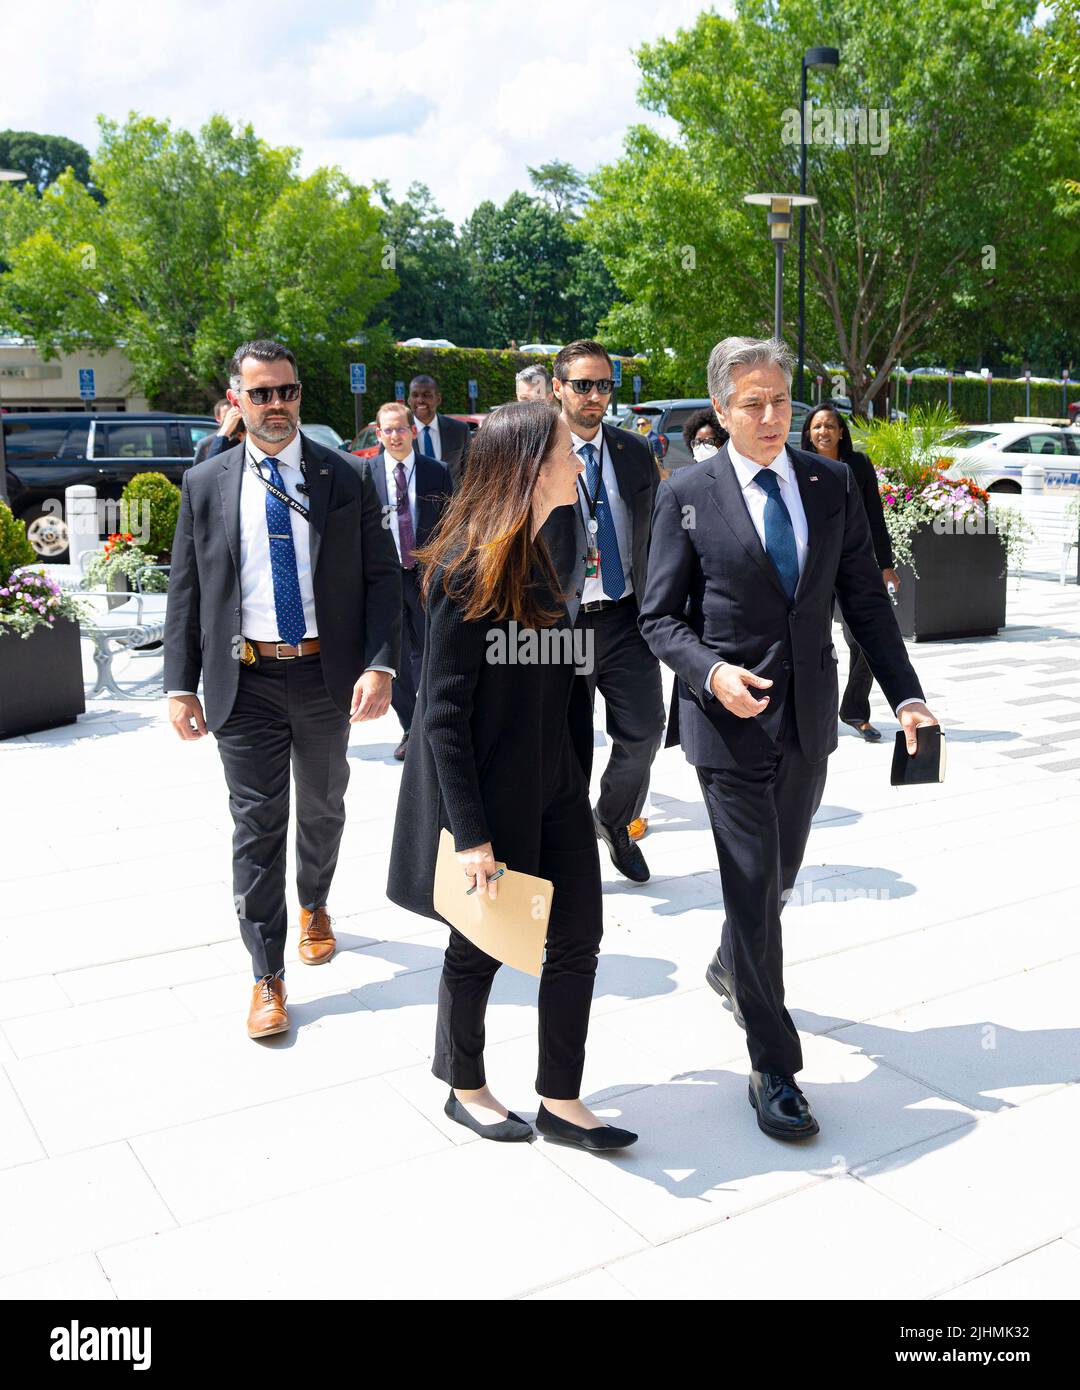 McLean, United States of America. 18 July, 2022. U.S. Secretary of State Antony Blinken, right, is escorted by Avril Haines, Director of National Intelligence on his arrival to address staff at the Office of National Intelligence, July 18, 2022 in McLean, Virginia. Credit: Freddie Everett/State Department/Alamy Live News Stock Photo